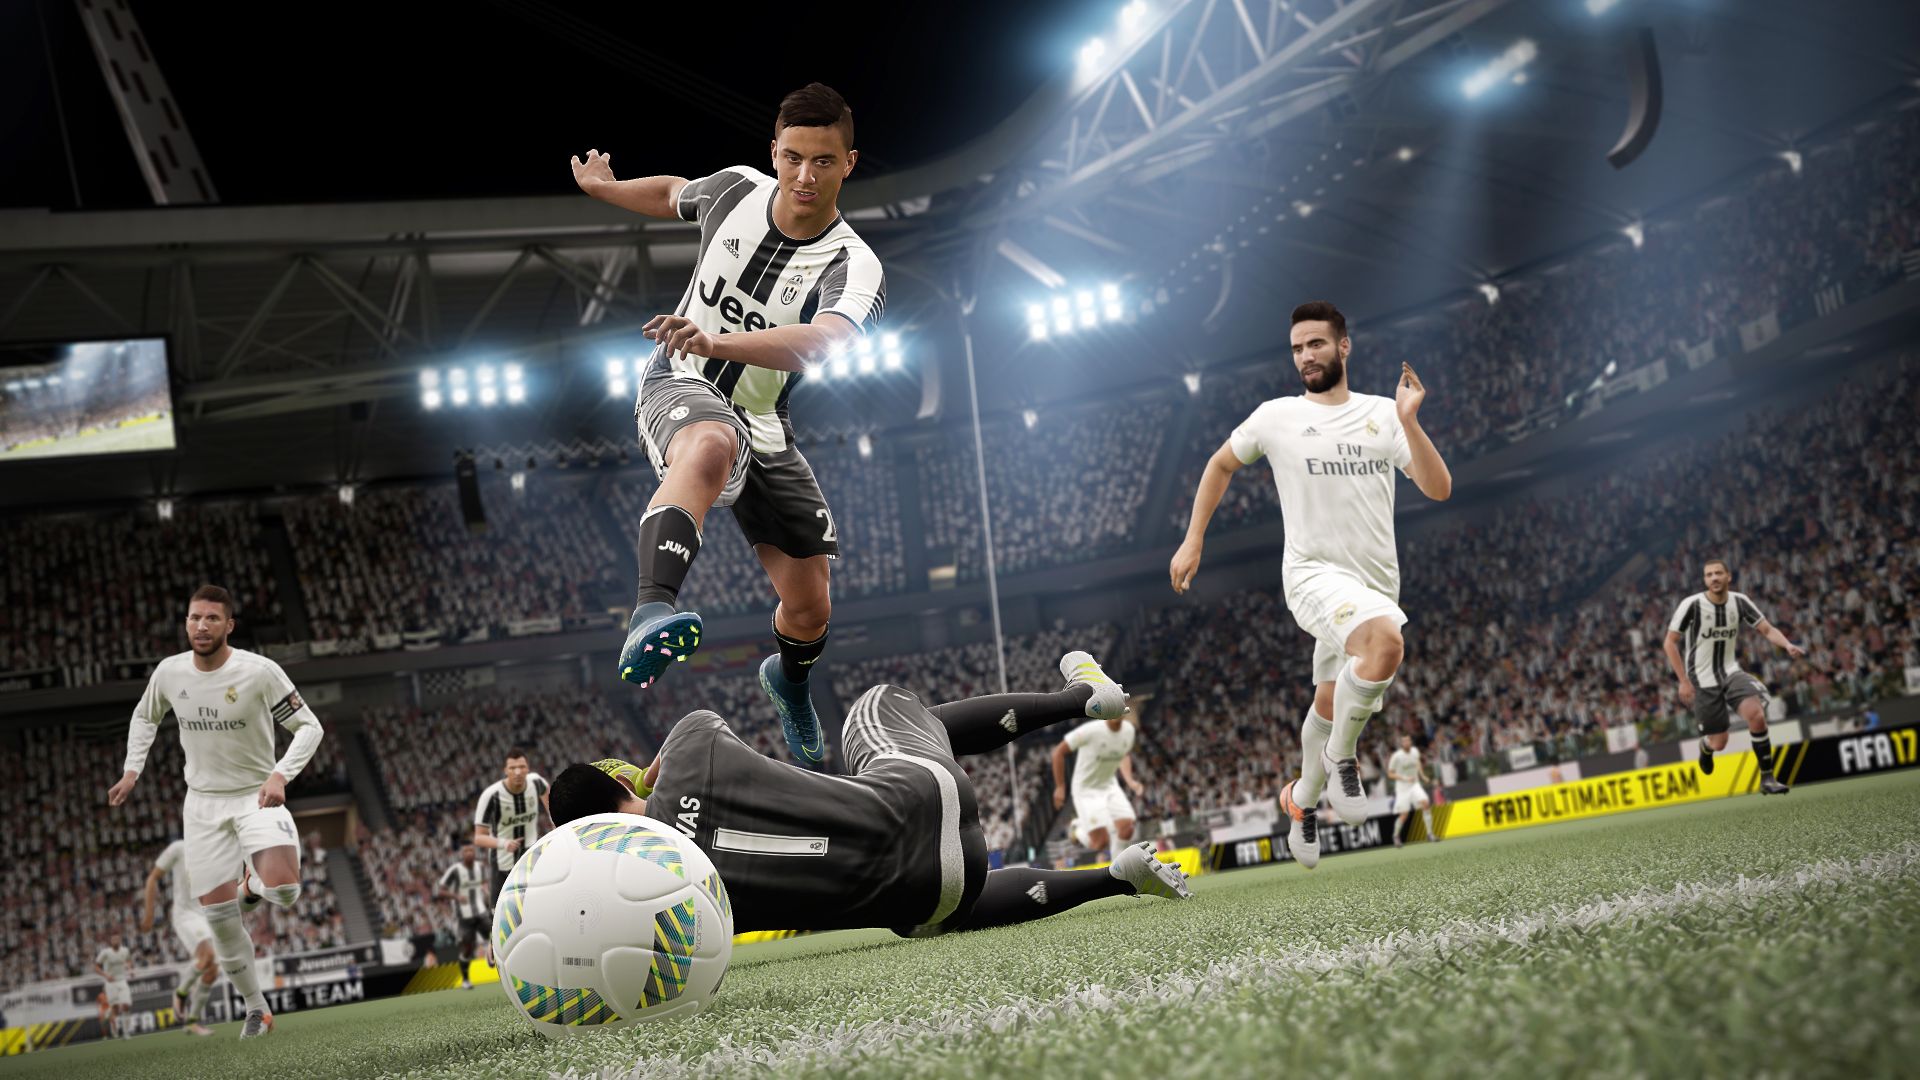 Find the best laptops for FIFA 17